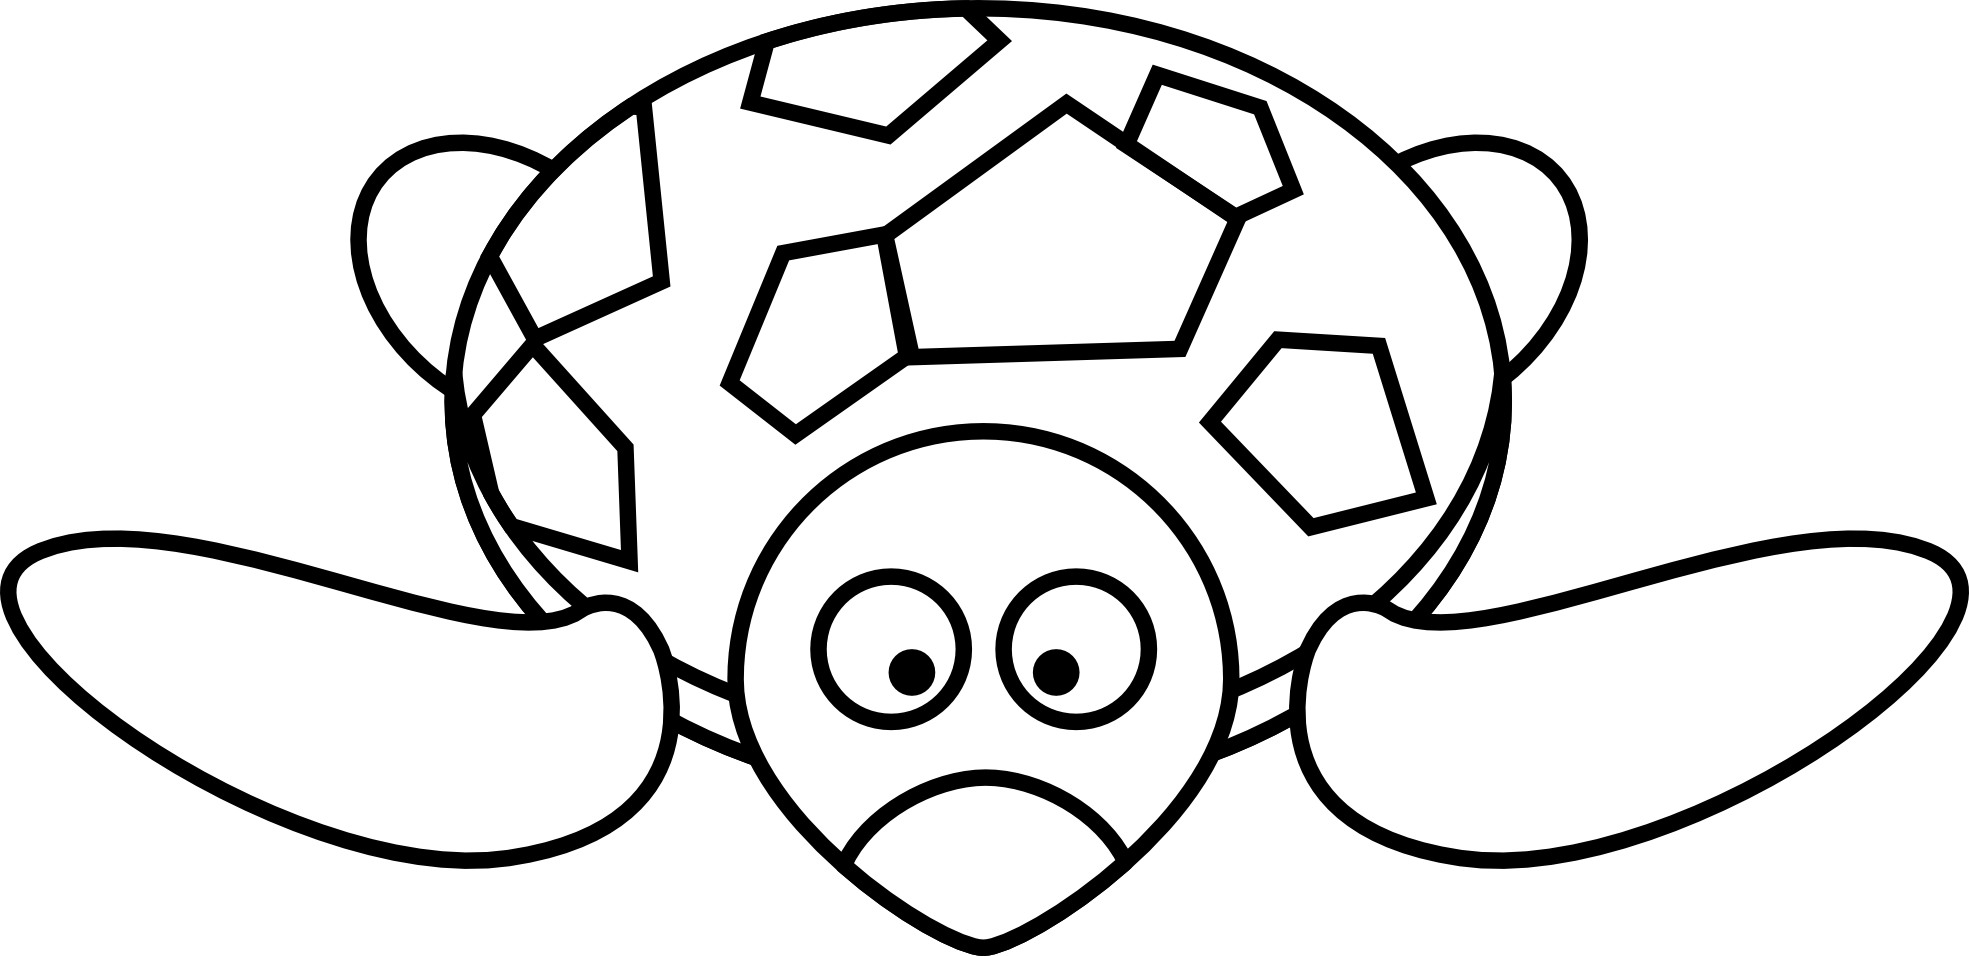 Free clipart turtle. Caricature black and white